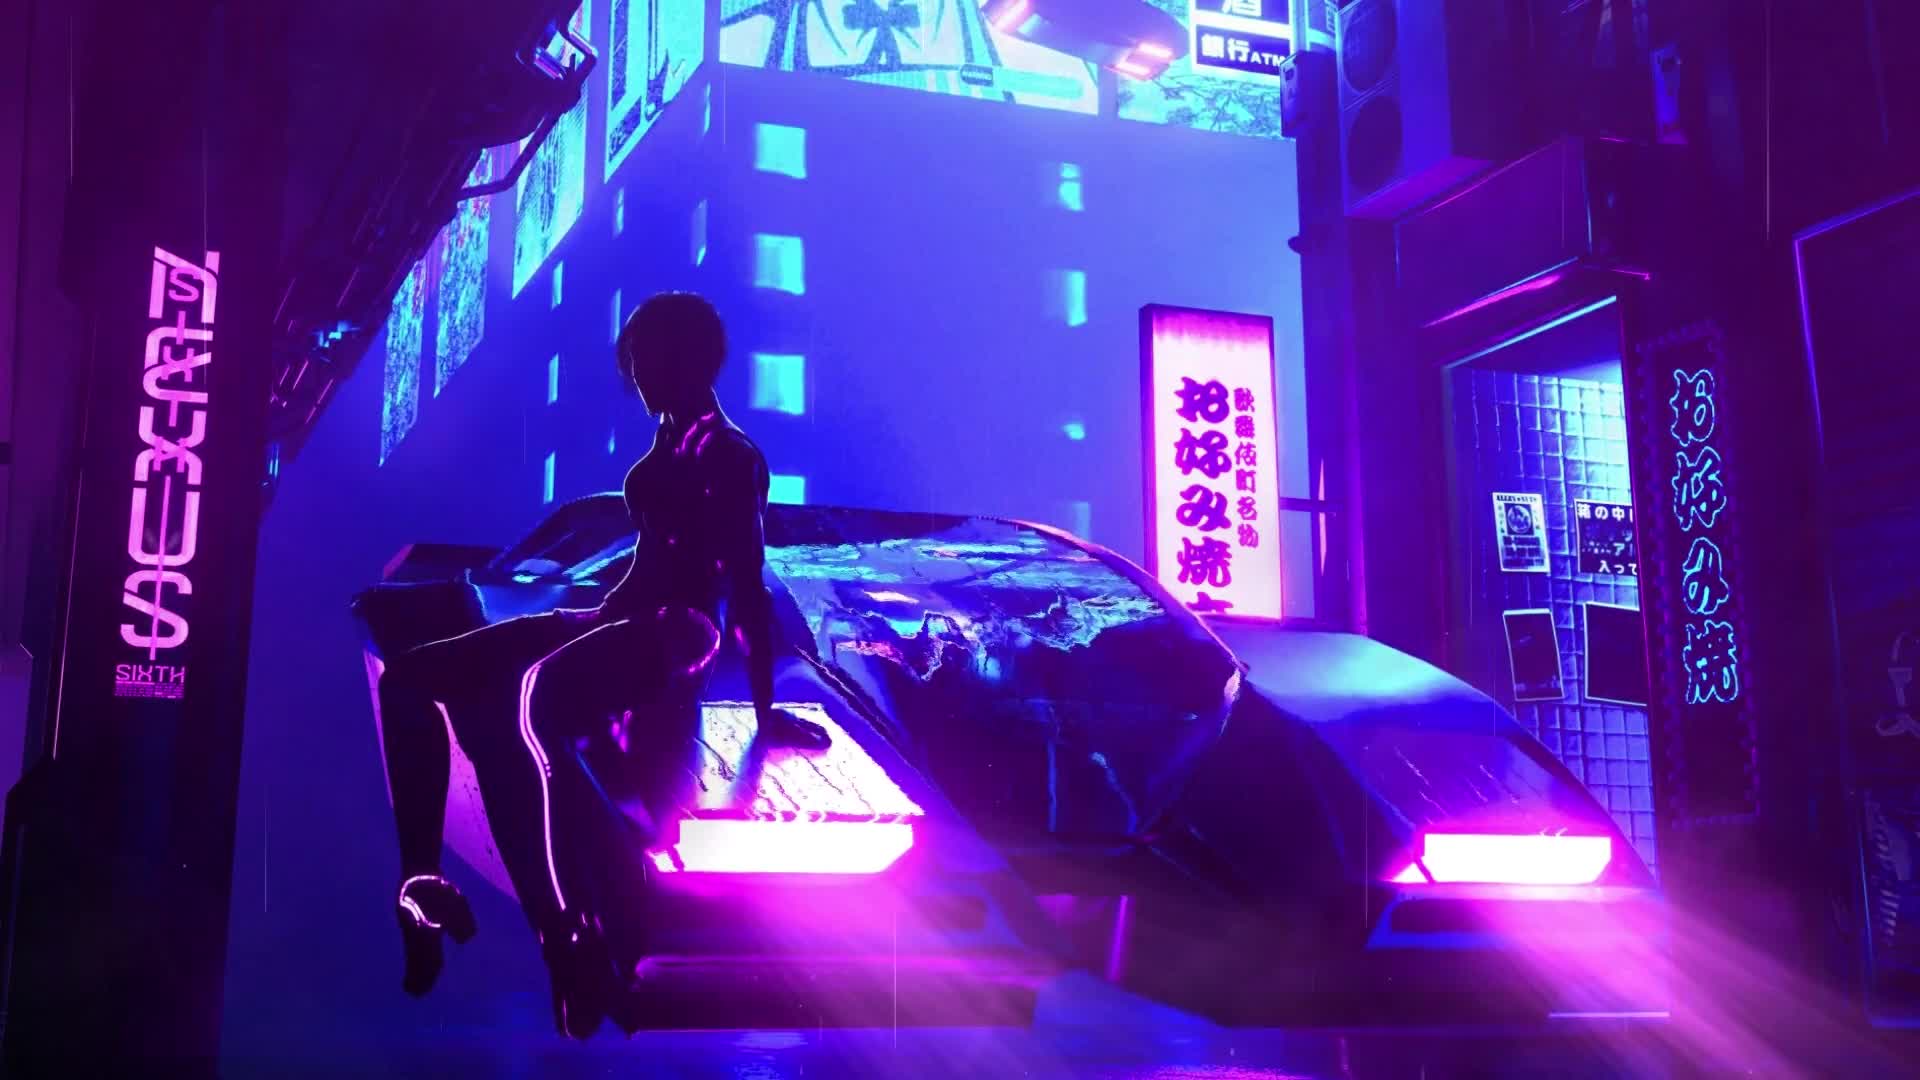 The Car Goes In The Neon City Live Wallpaper 2560x1440 5516